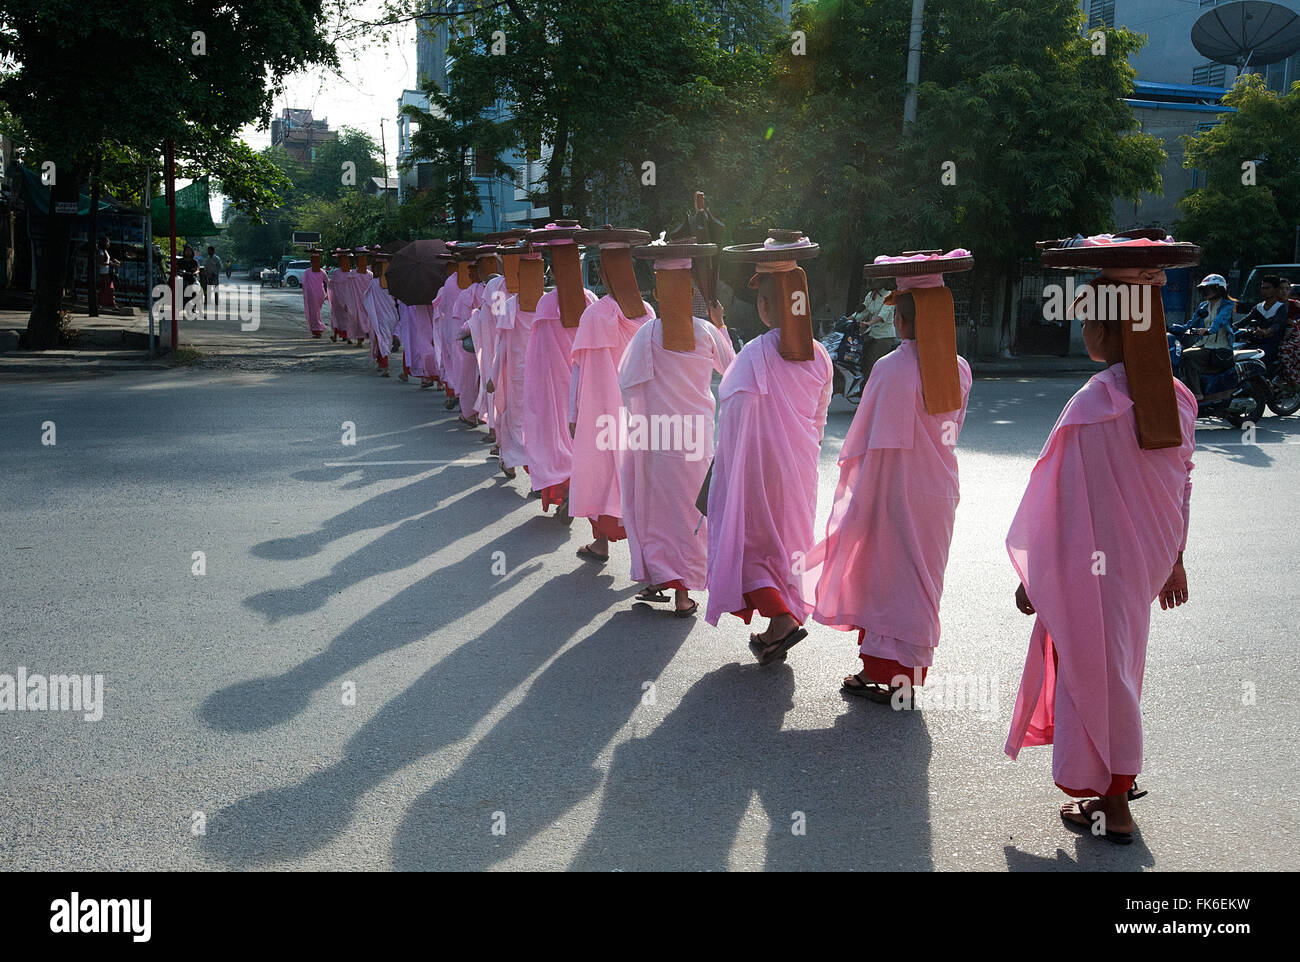 Long line of Buddhist nuns dressed in pink robes, heads covered, alms bowls on their heads, crossing main road in Mandalay Stock Photo